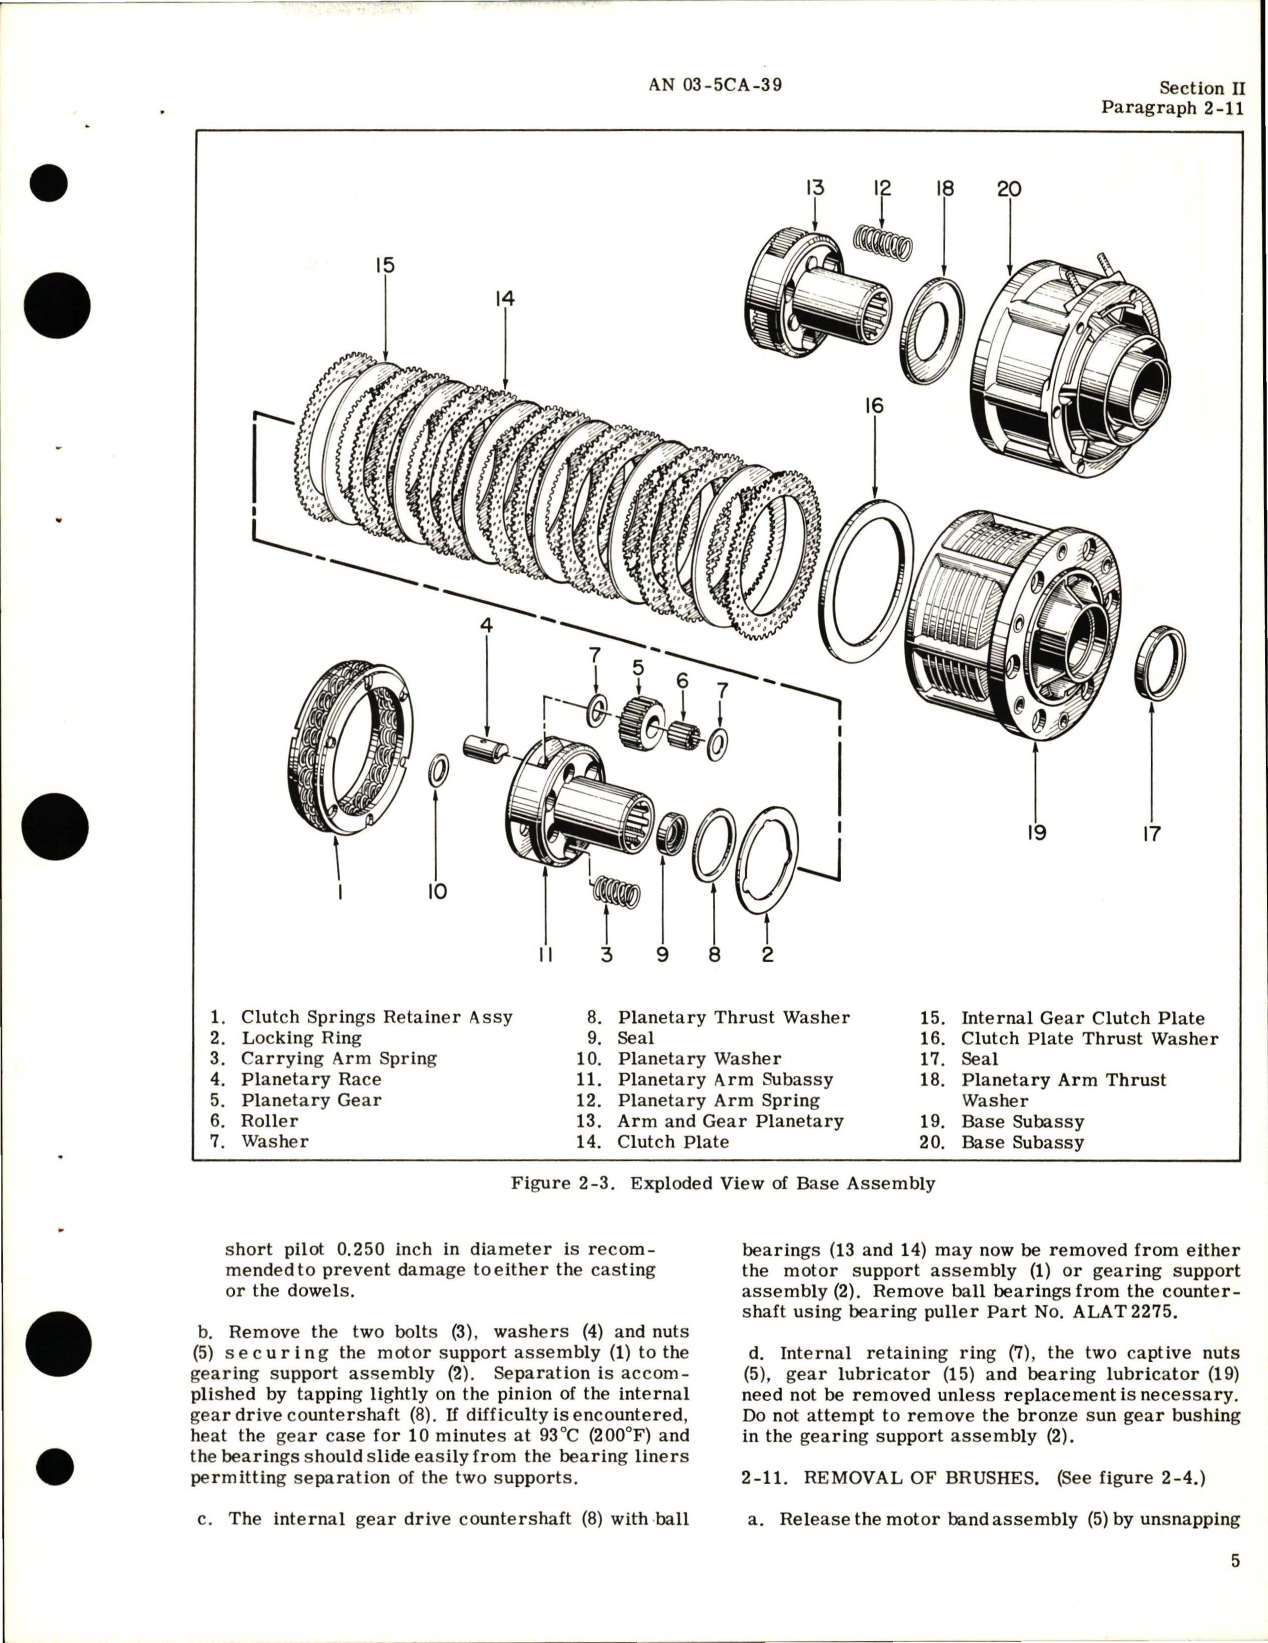 Sample page 9 from AirCorps Library document: Overhaul Instructions for Engine Starters 